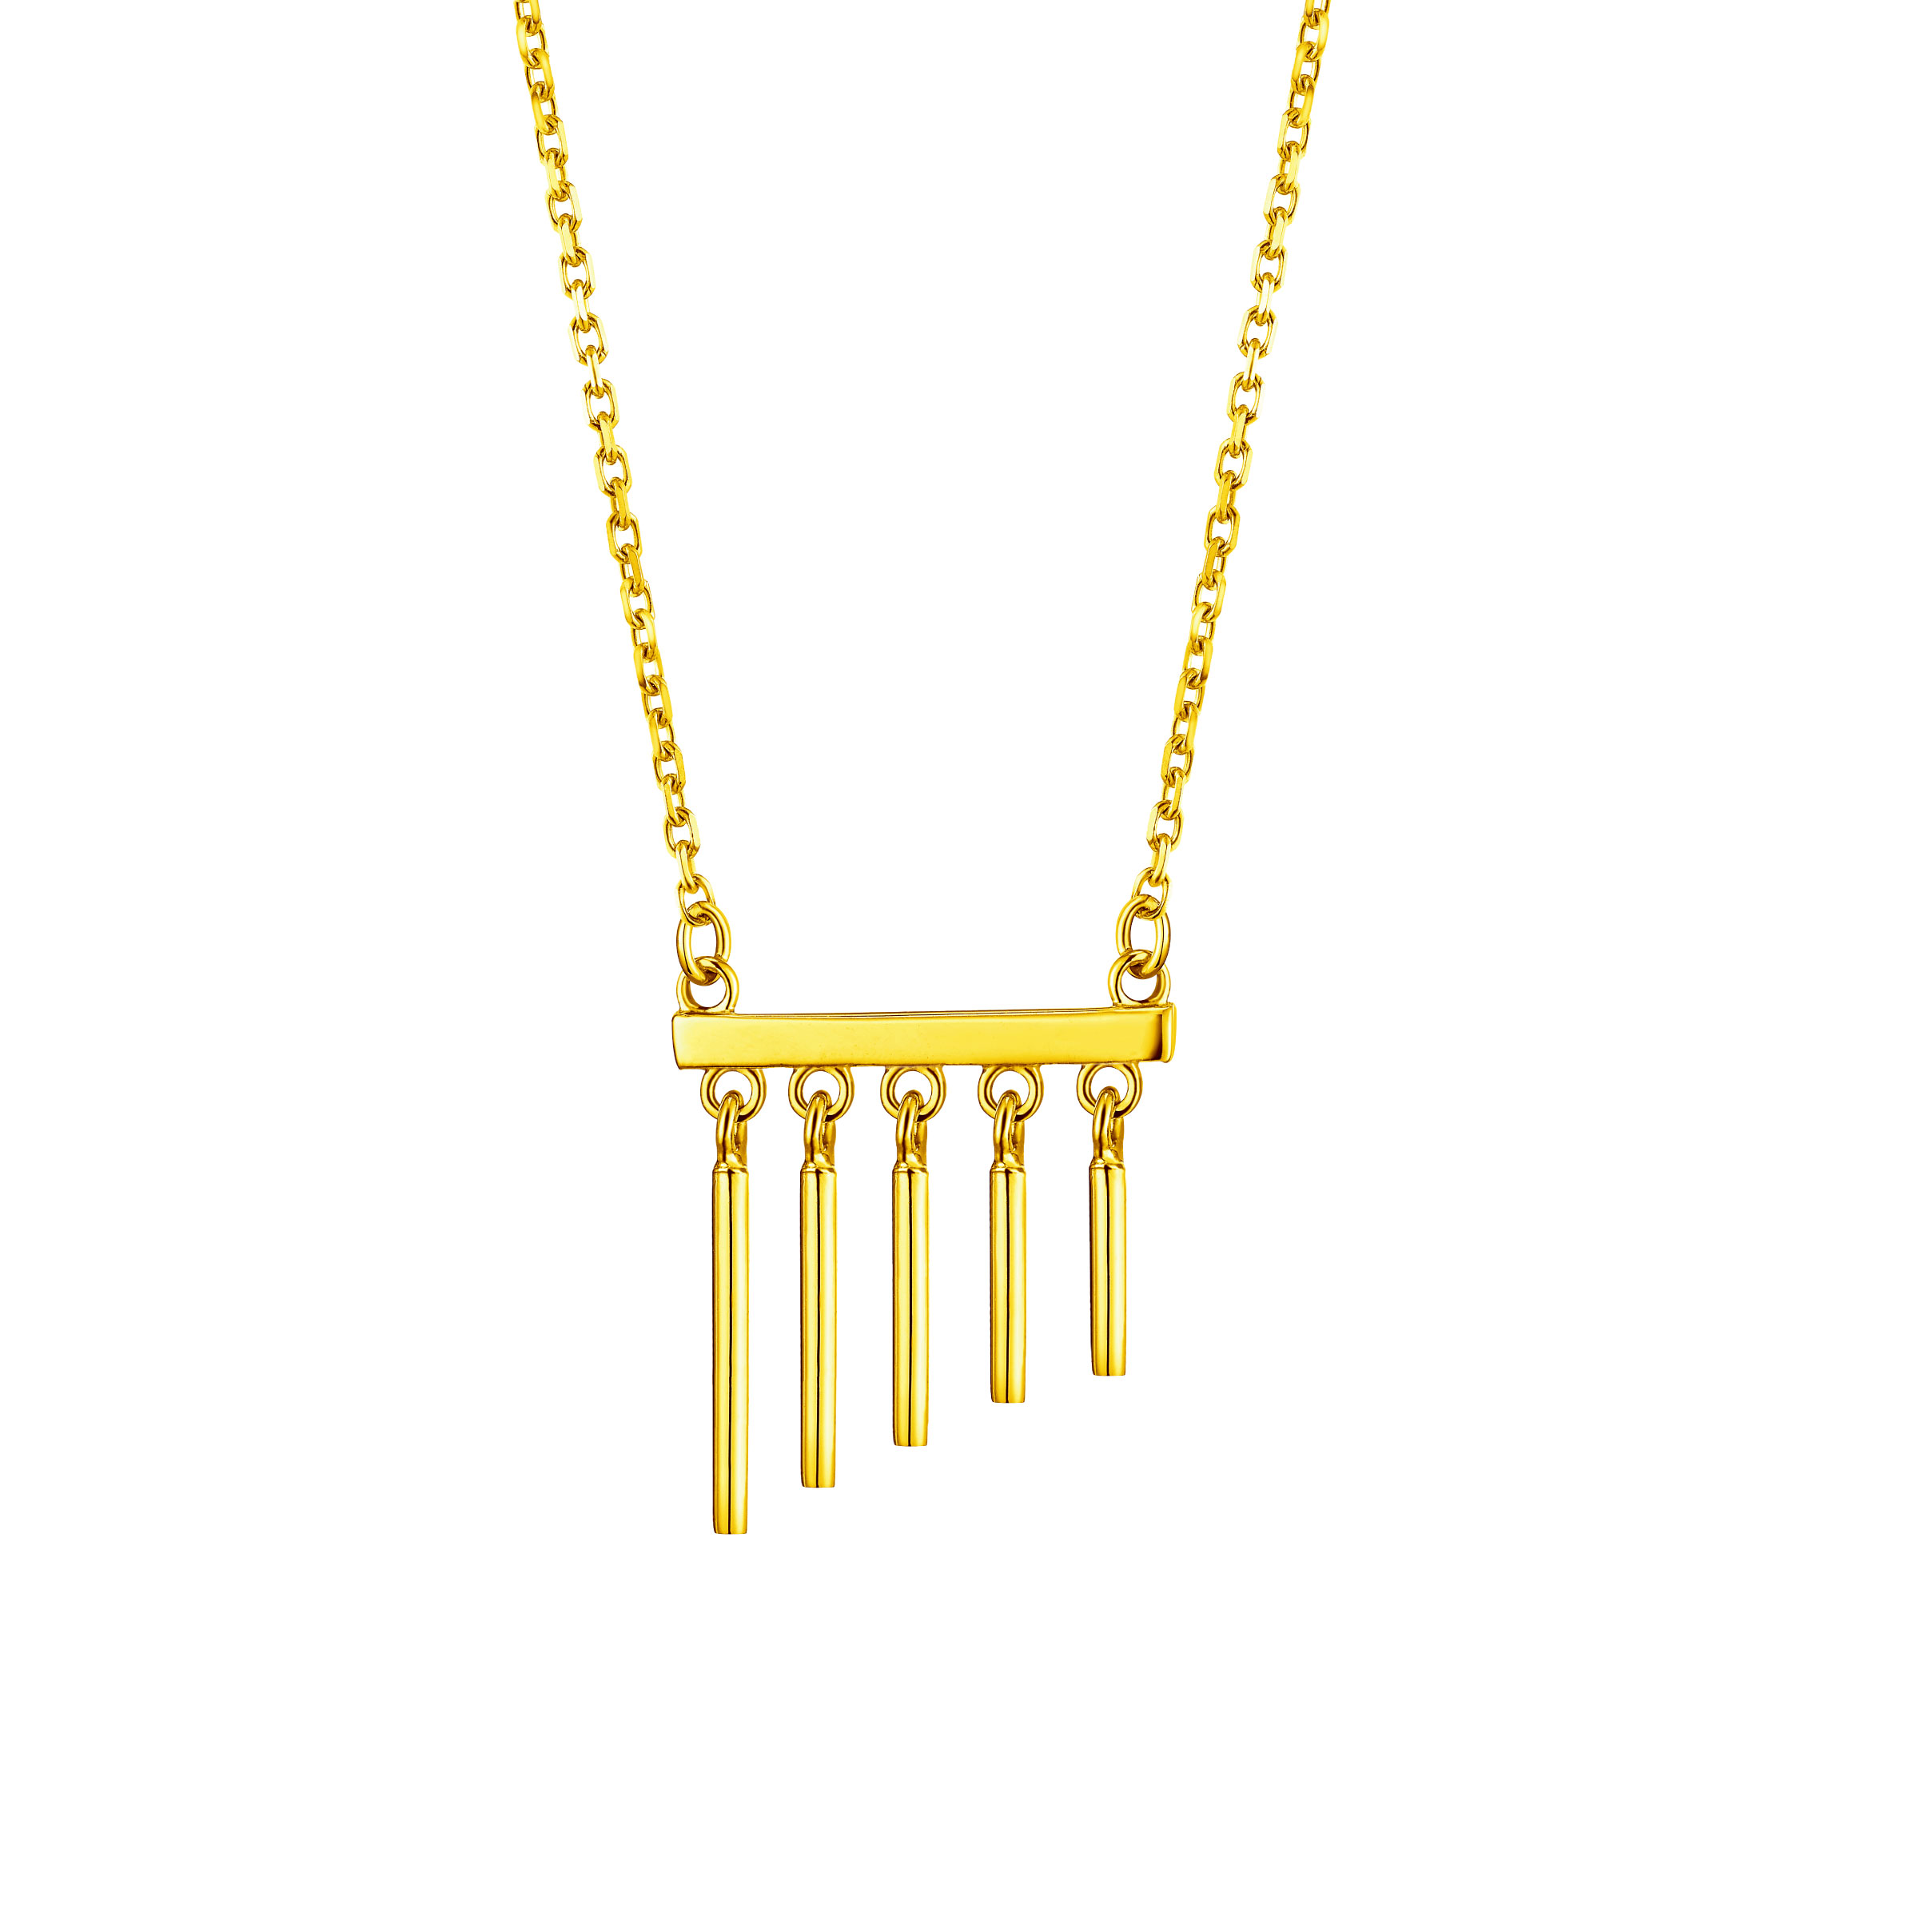 Goldstyle "Wind Chimes" Gold Necklace